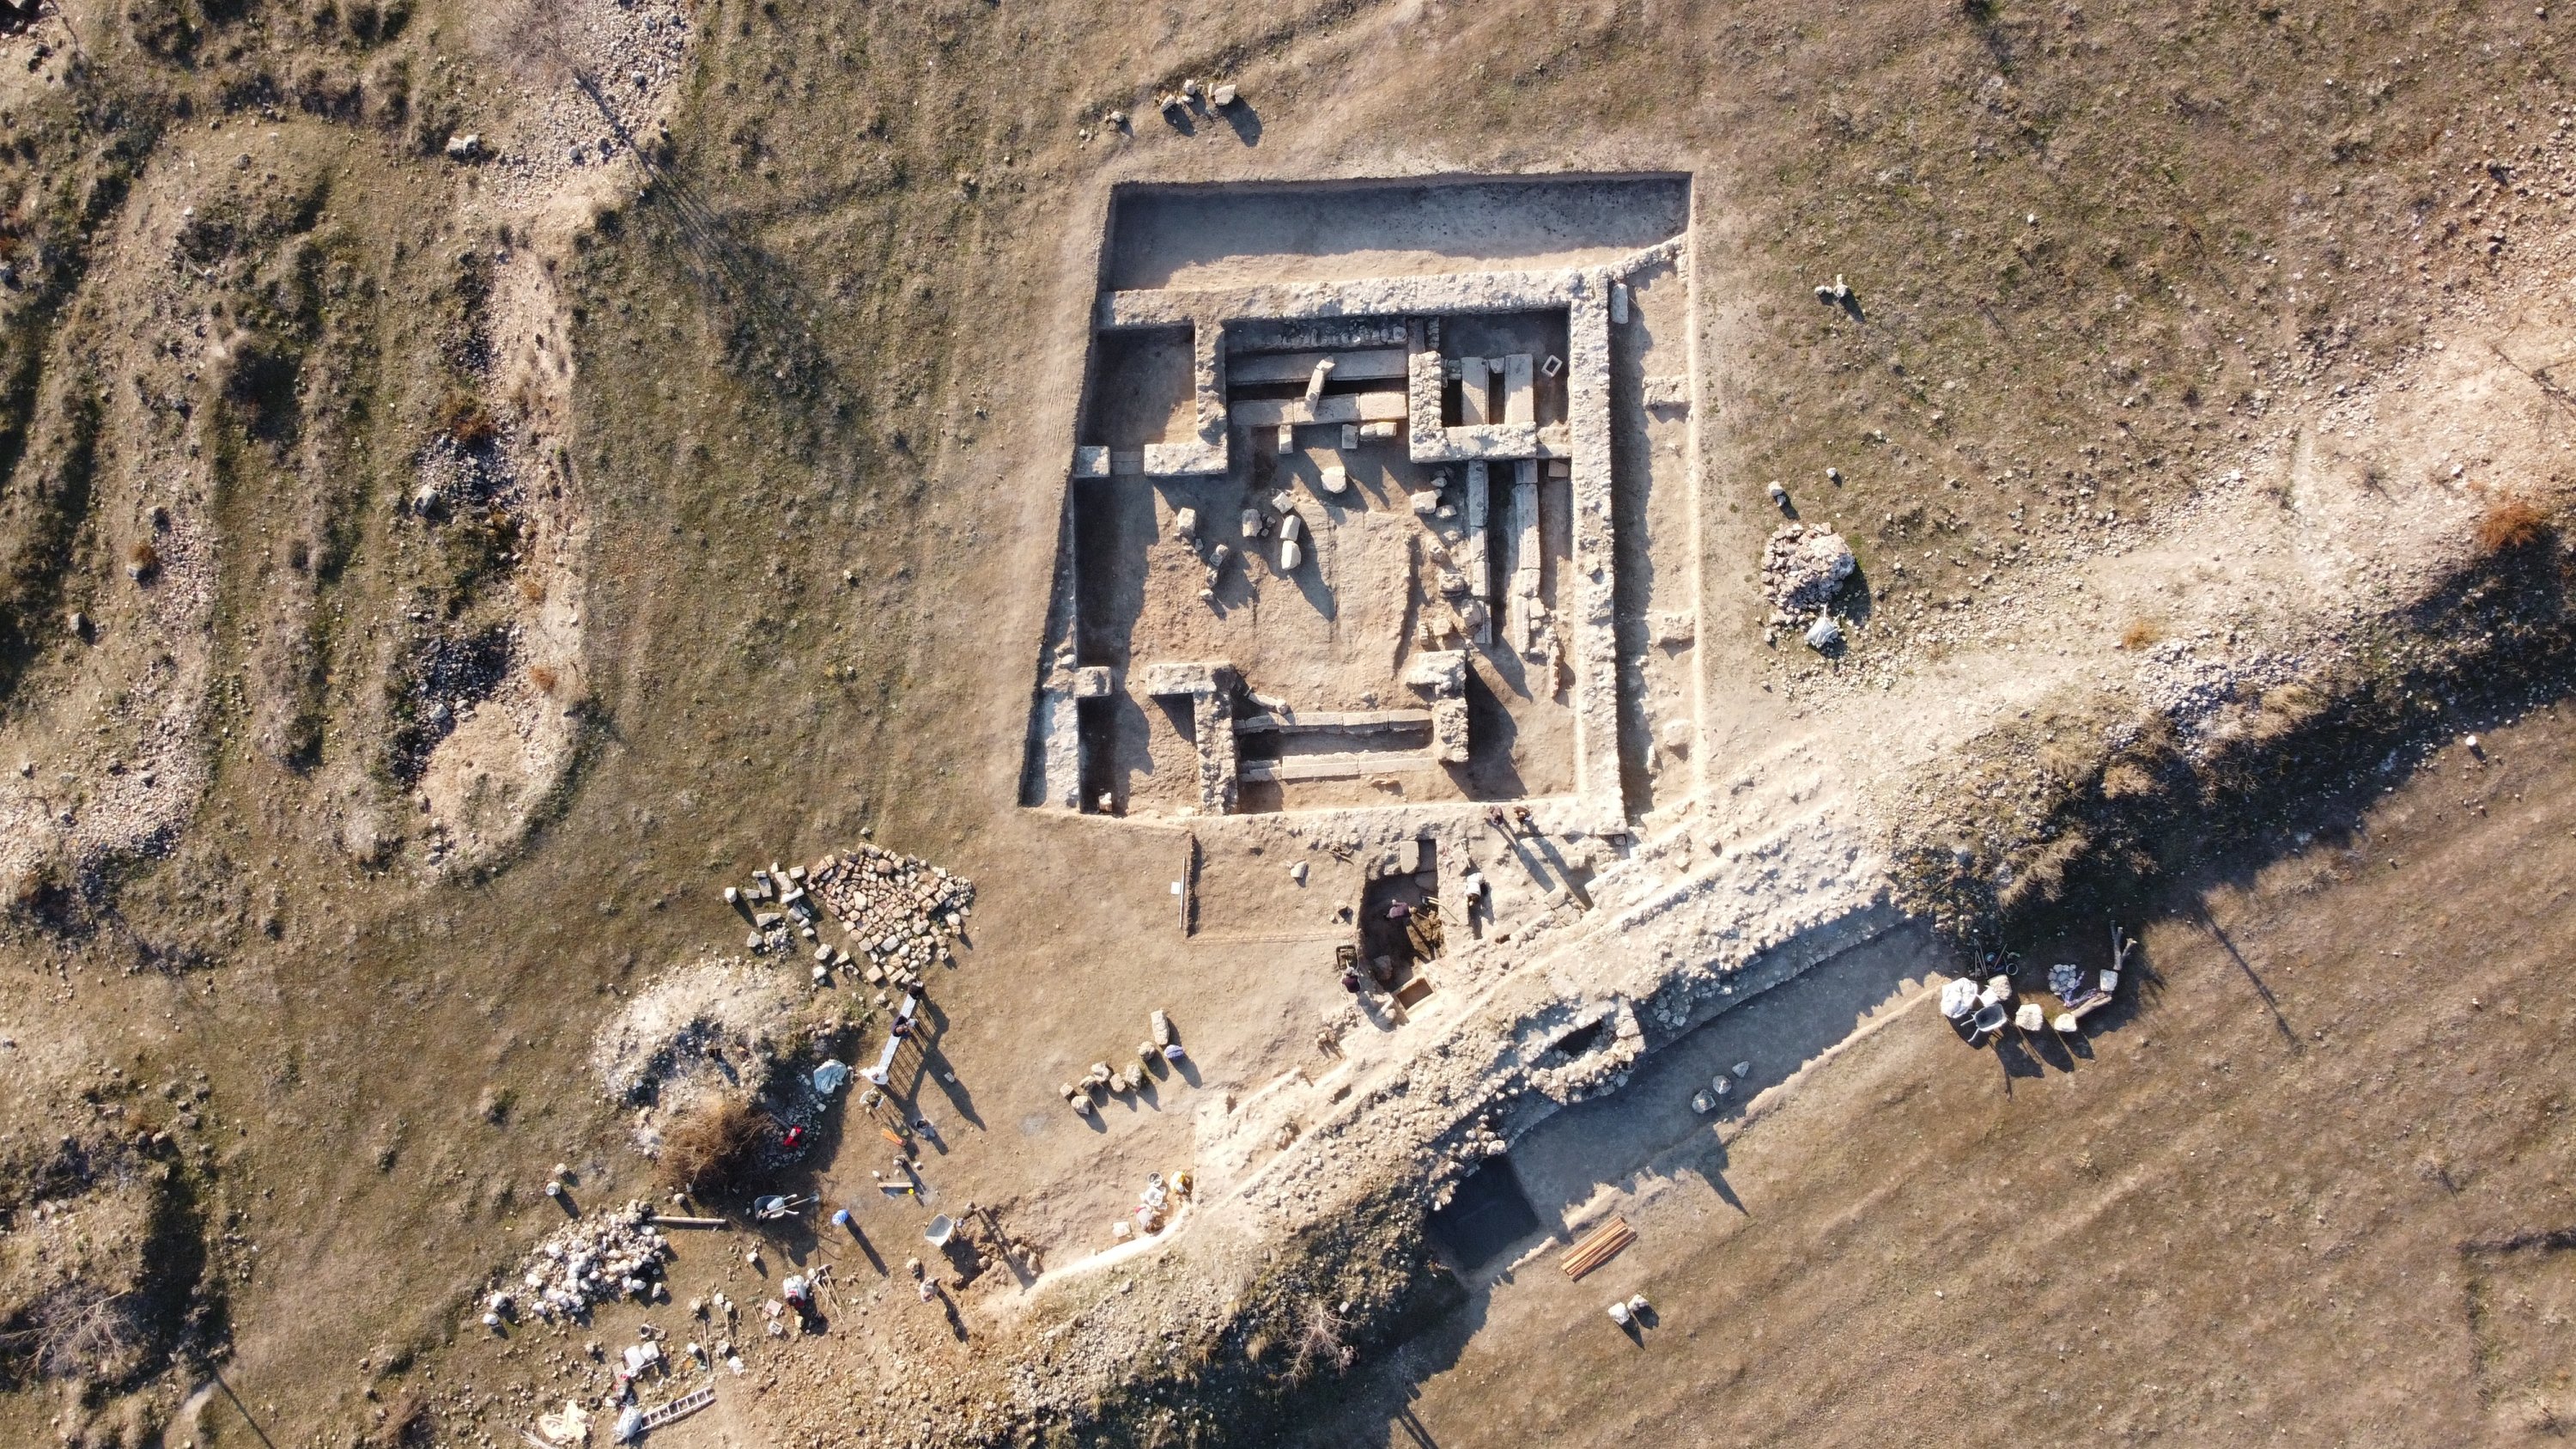 An aerial view of the square structure where the steelyard weight was found in the ancient city of Hadrianopolis, Karabük, northern Turkey, Nov. 30, 2021. (AA Photo)